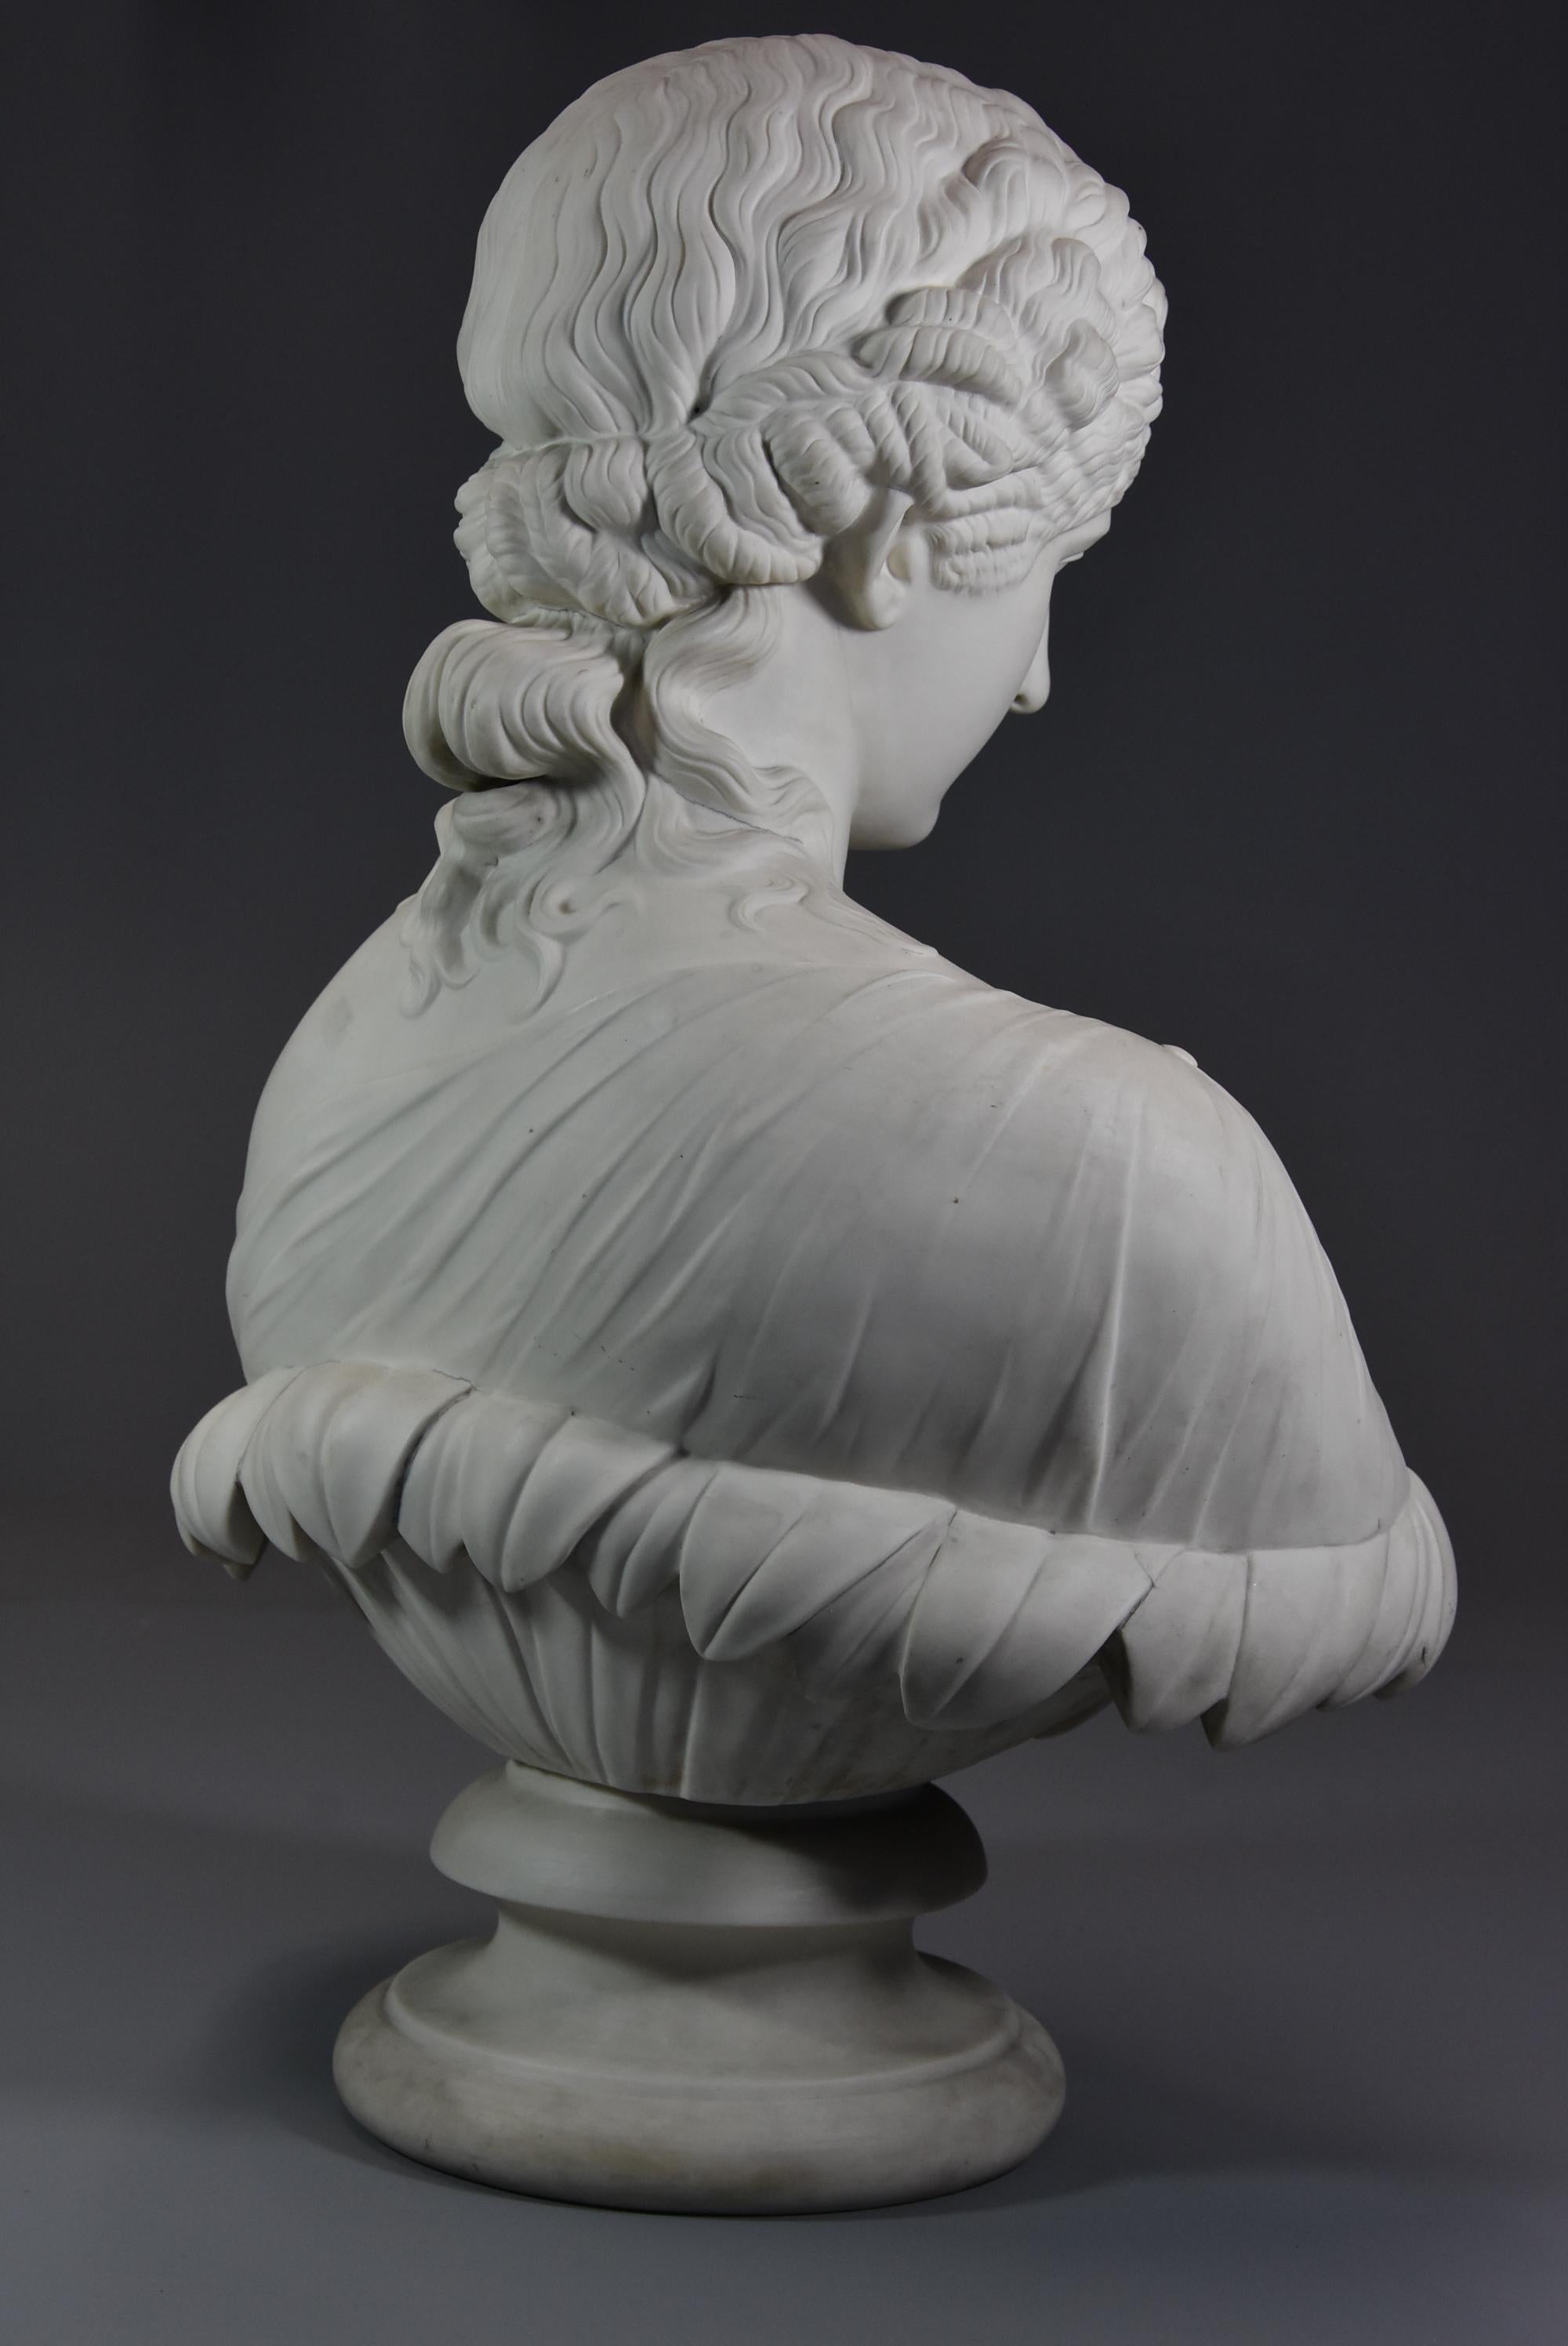 Decorative Large Mid-19th Century Parian Bust of ‘Clytie’, Stamped ‘Copeland' 3